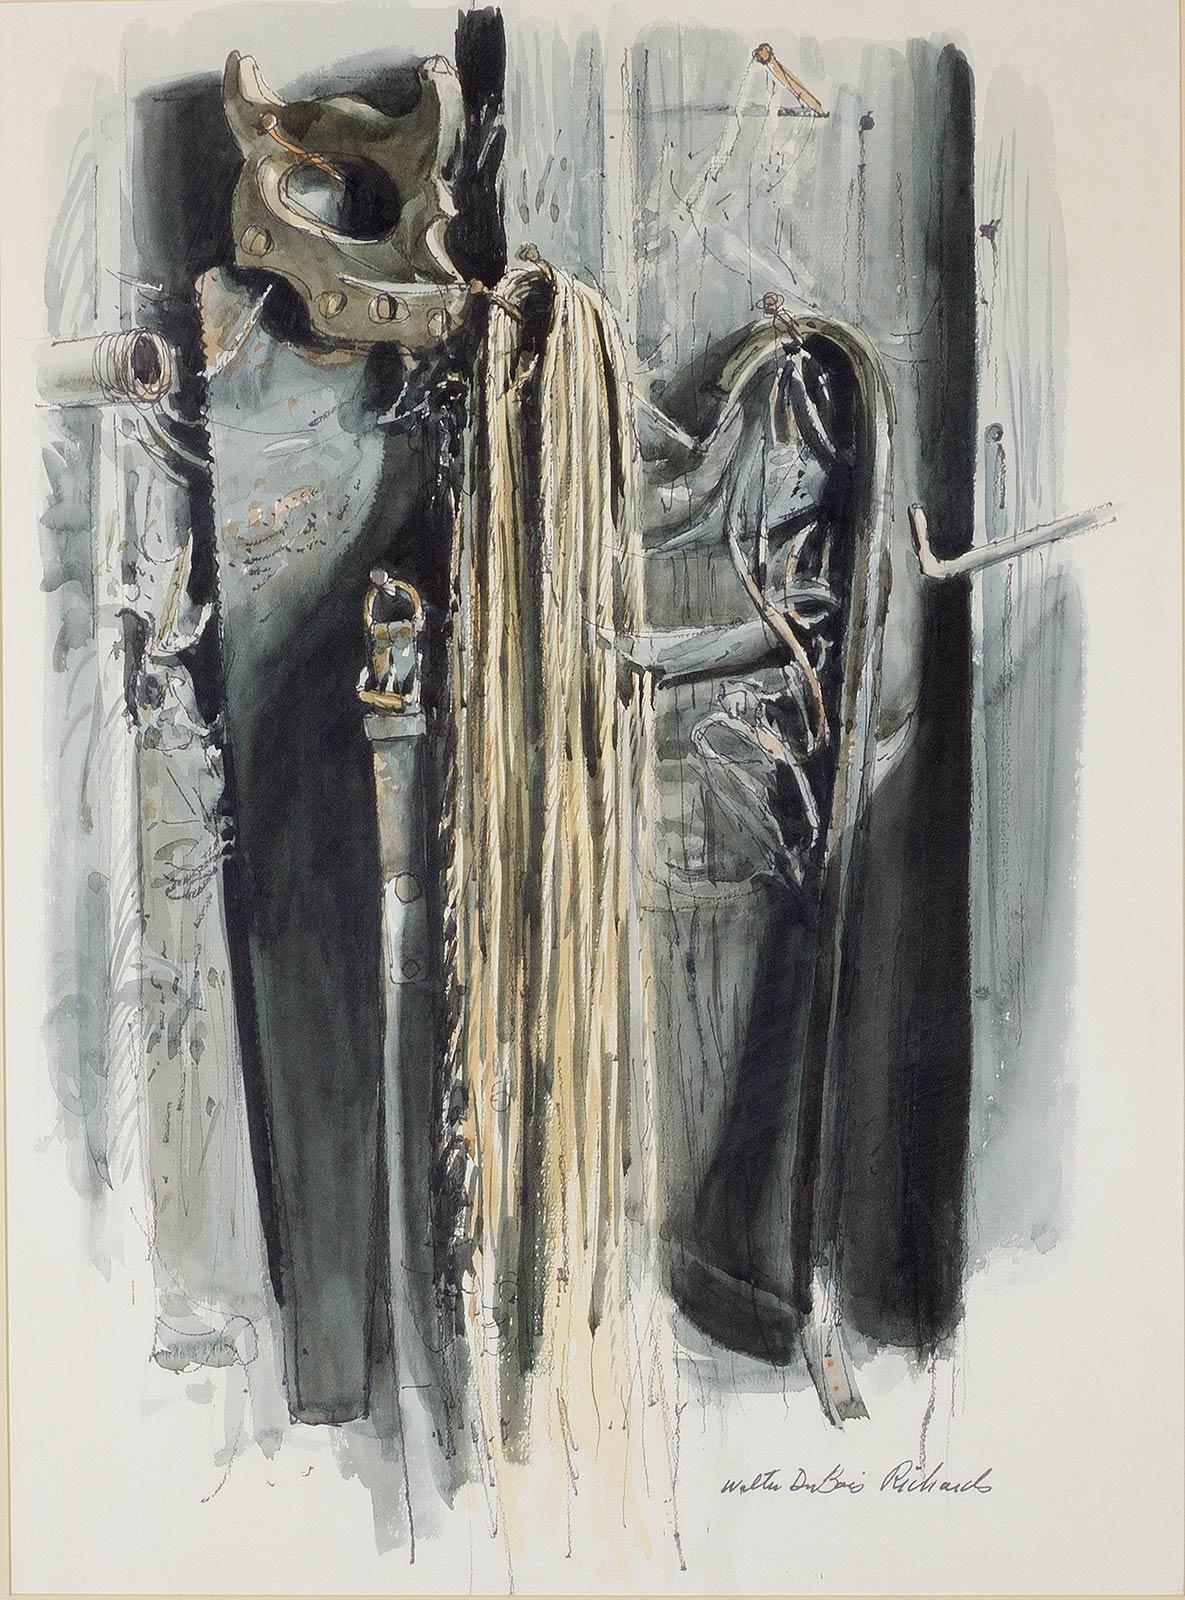 Homer's Things (tools of a working farmer with saw, crowbar, rope and cinch) - Gray Interior Art by Walter DuBois Richards